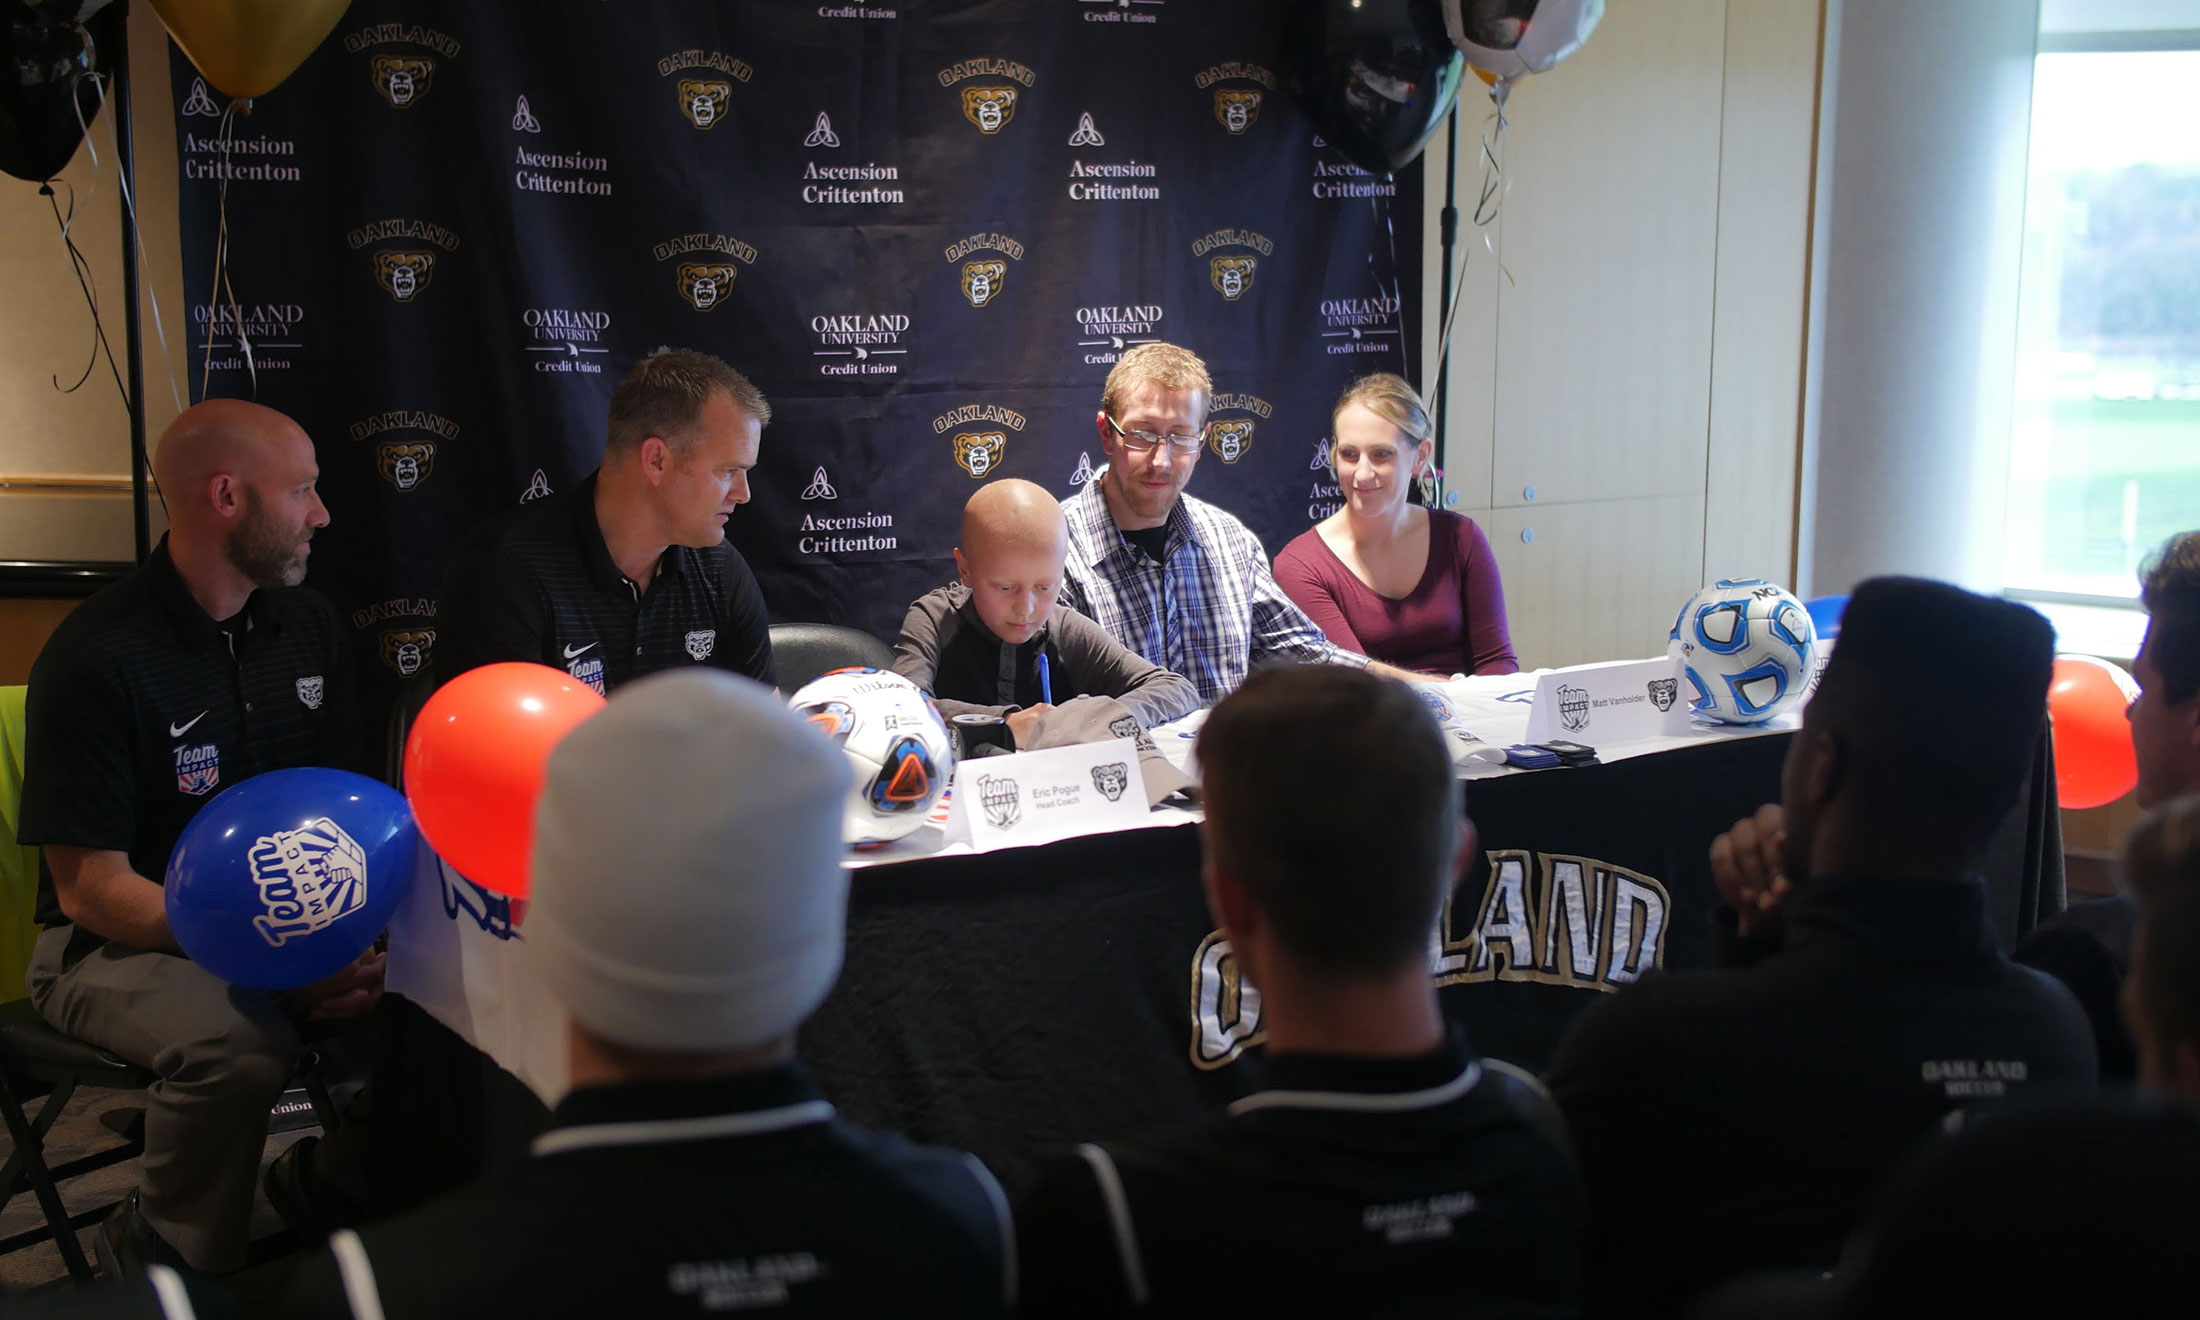 Alex VanHolder in the Oakland University Athletics Department's press room signing a letter of intent with the men's soccer team